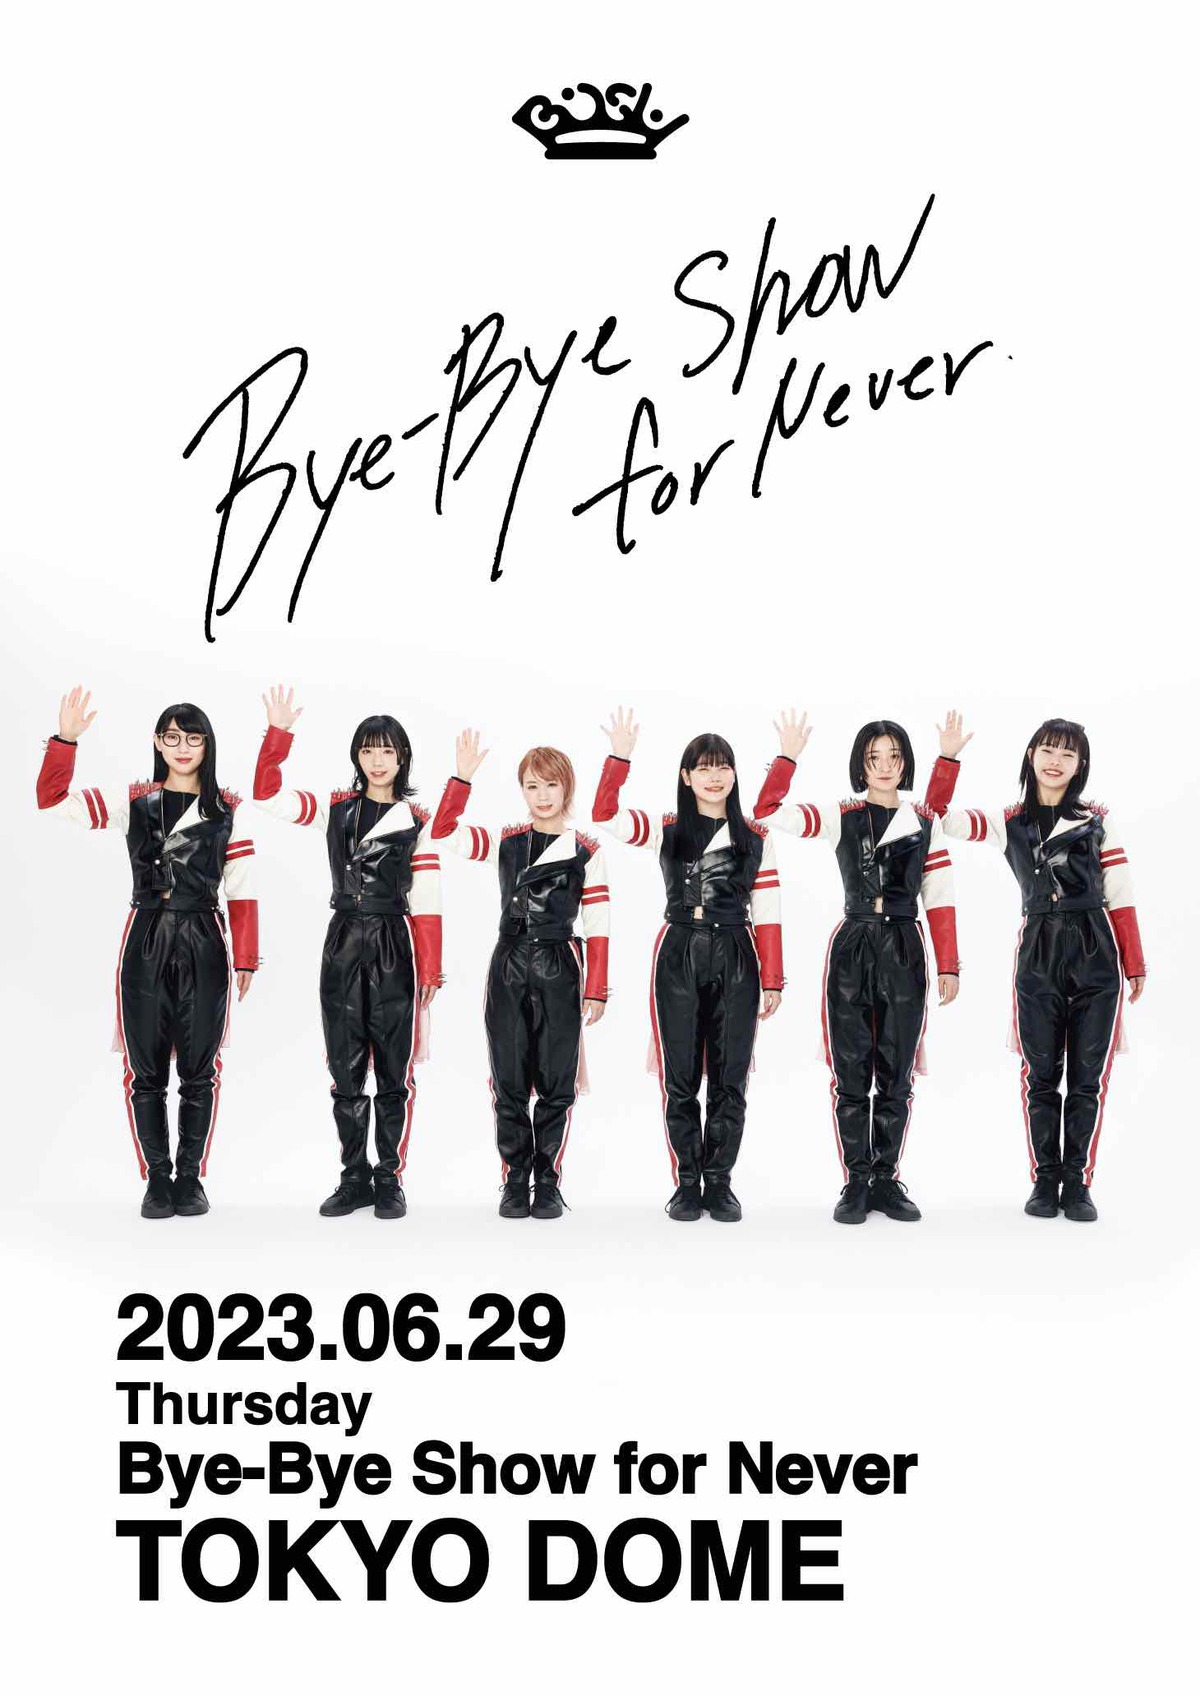 Bye-Bye Show for Never at TOKYO DOMEチェキ無